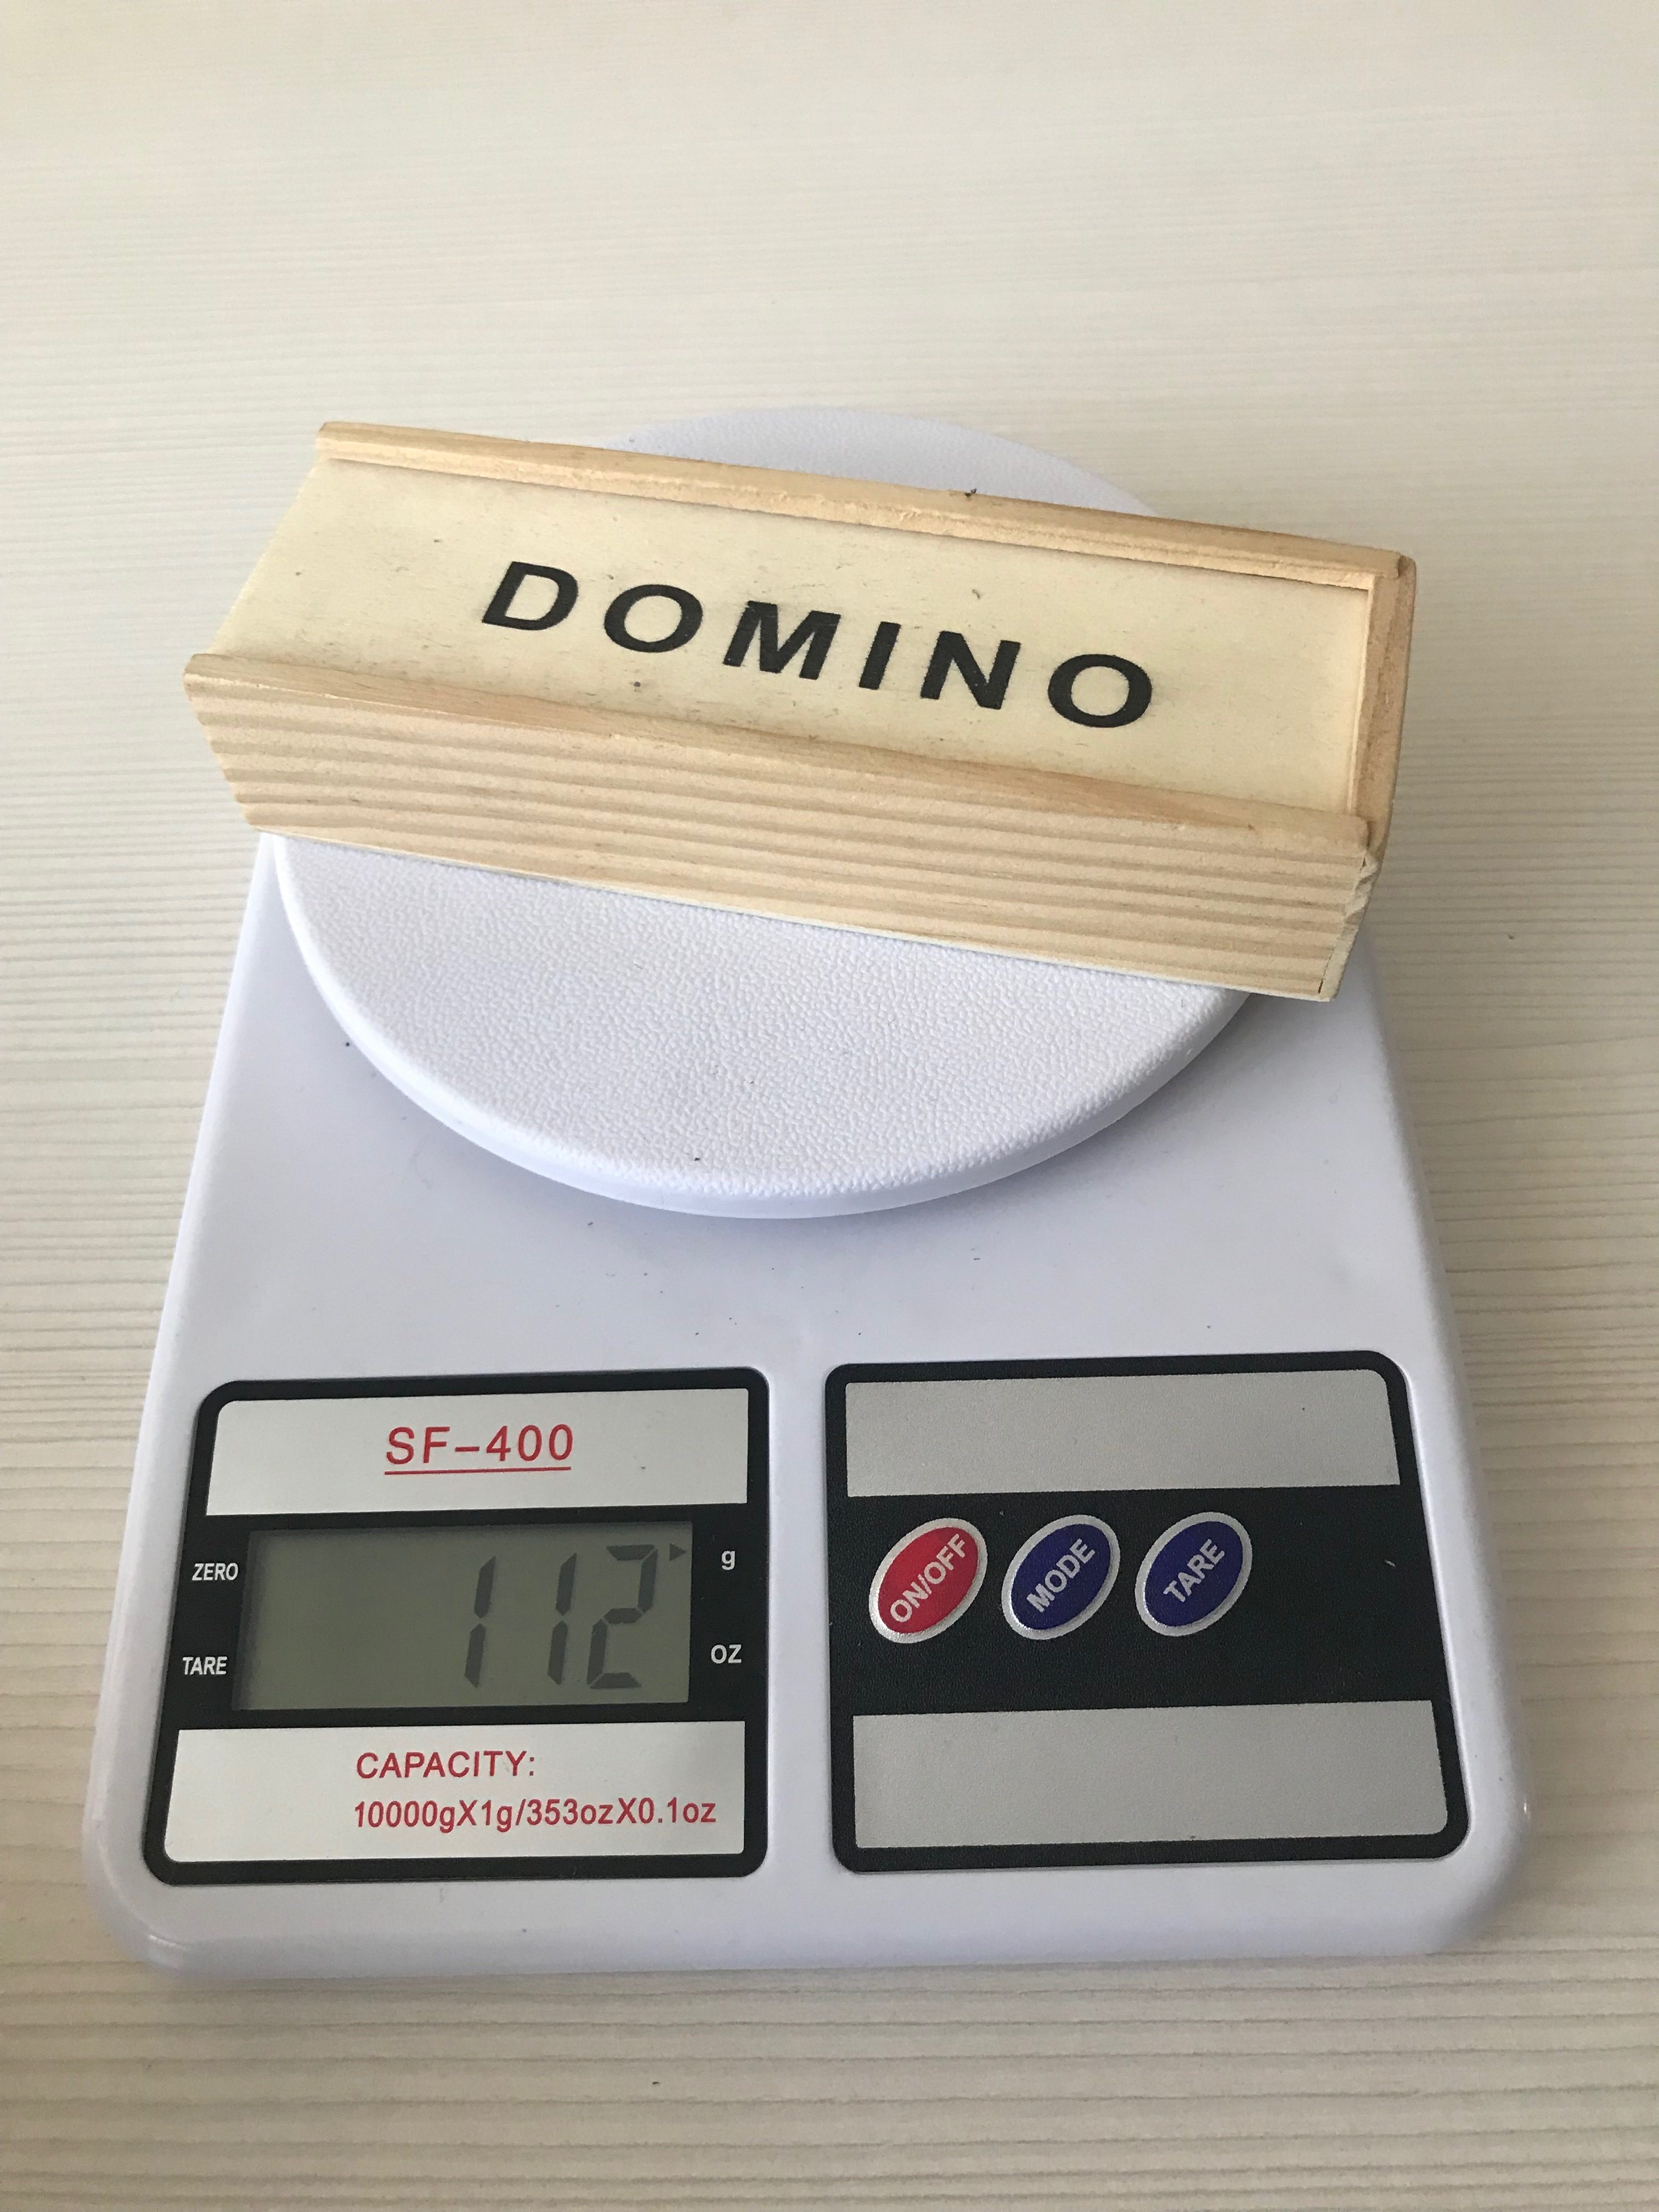 How much does a domino weigh?